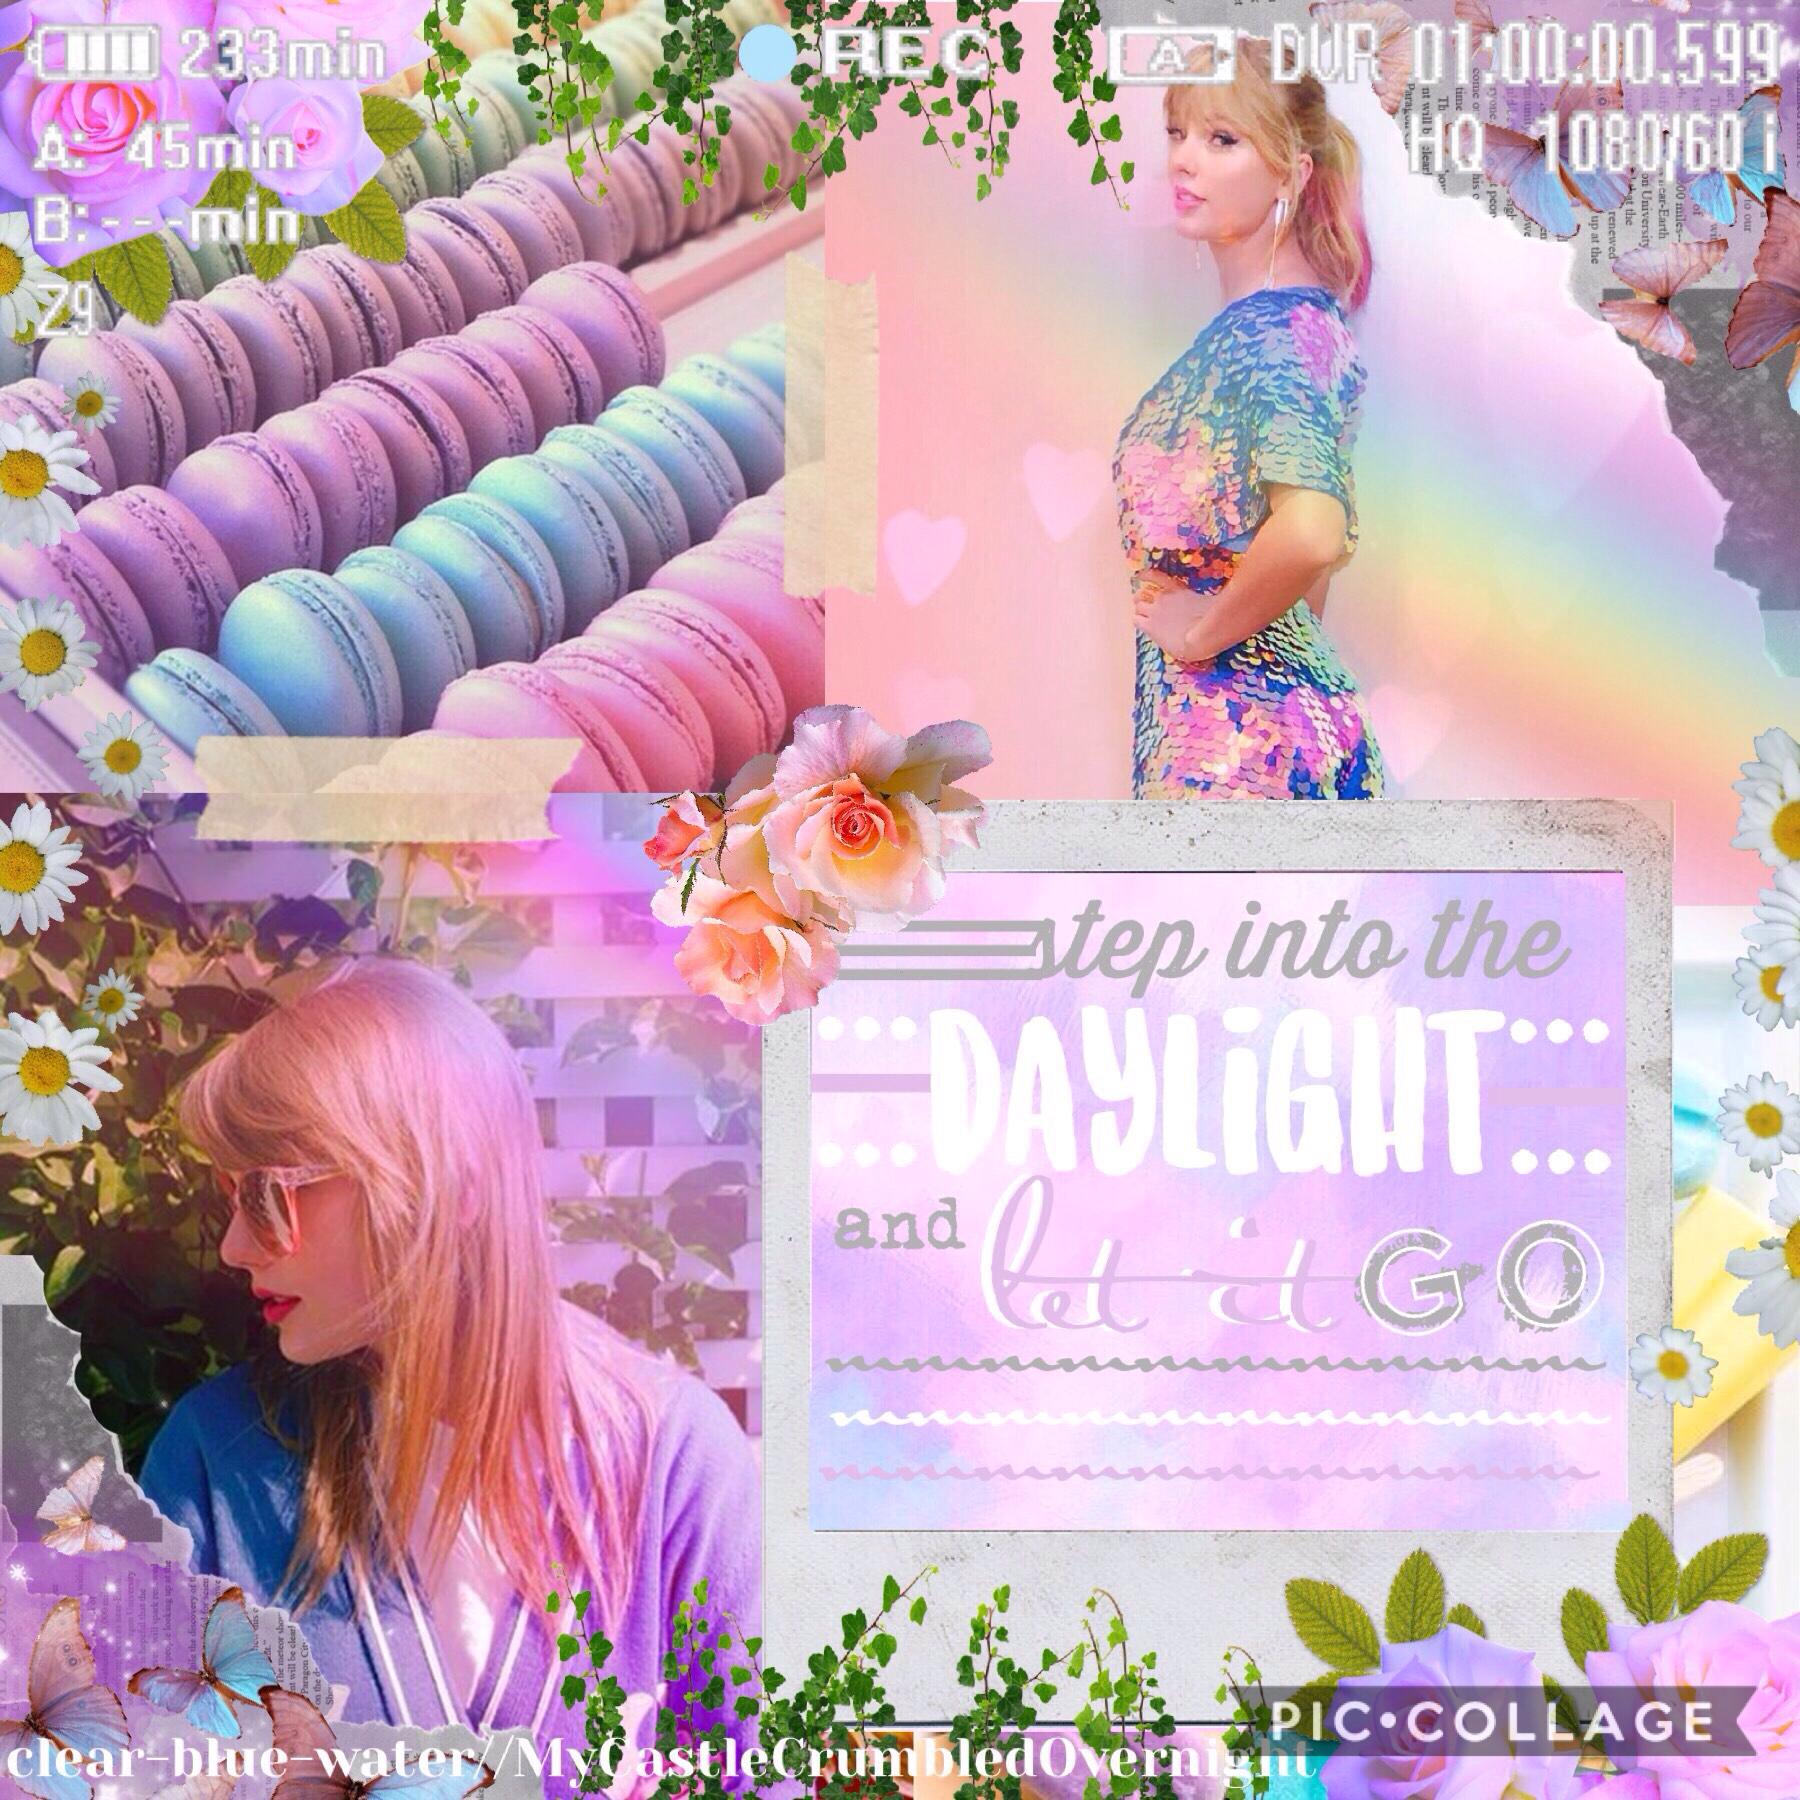 🎀T A P🎀
Collab with the amazing MyCastleCrumbledOvernight! I did the background and she did the amazing quote. Also thank you so much for the feature on my Collab with xXStarDustXx
QOTD: Are you excited for ts7?
AOTD: Yassssssss!!!!!!!!